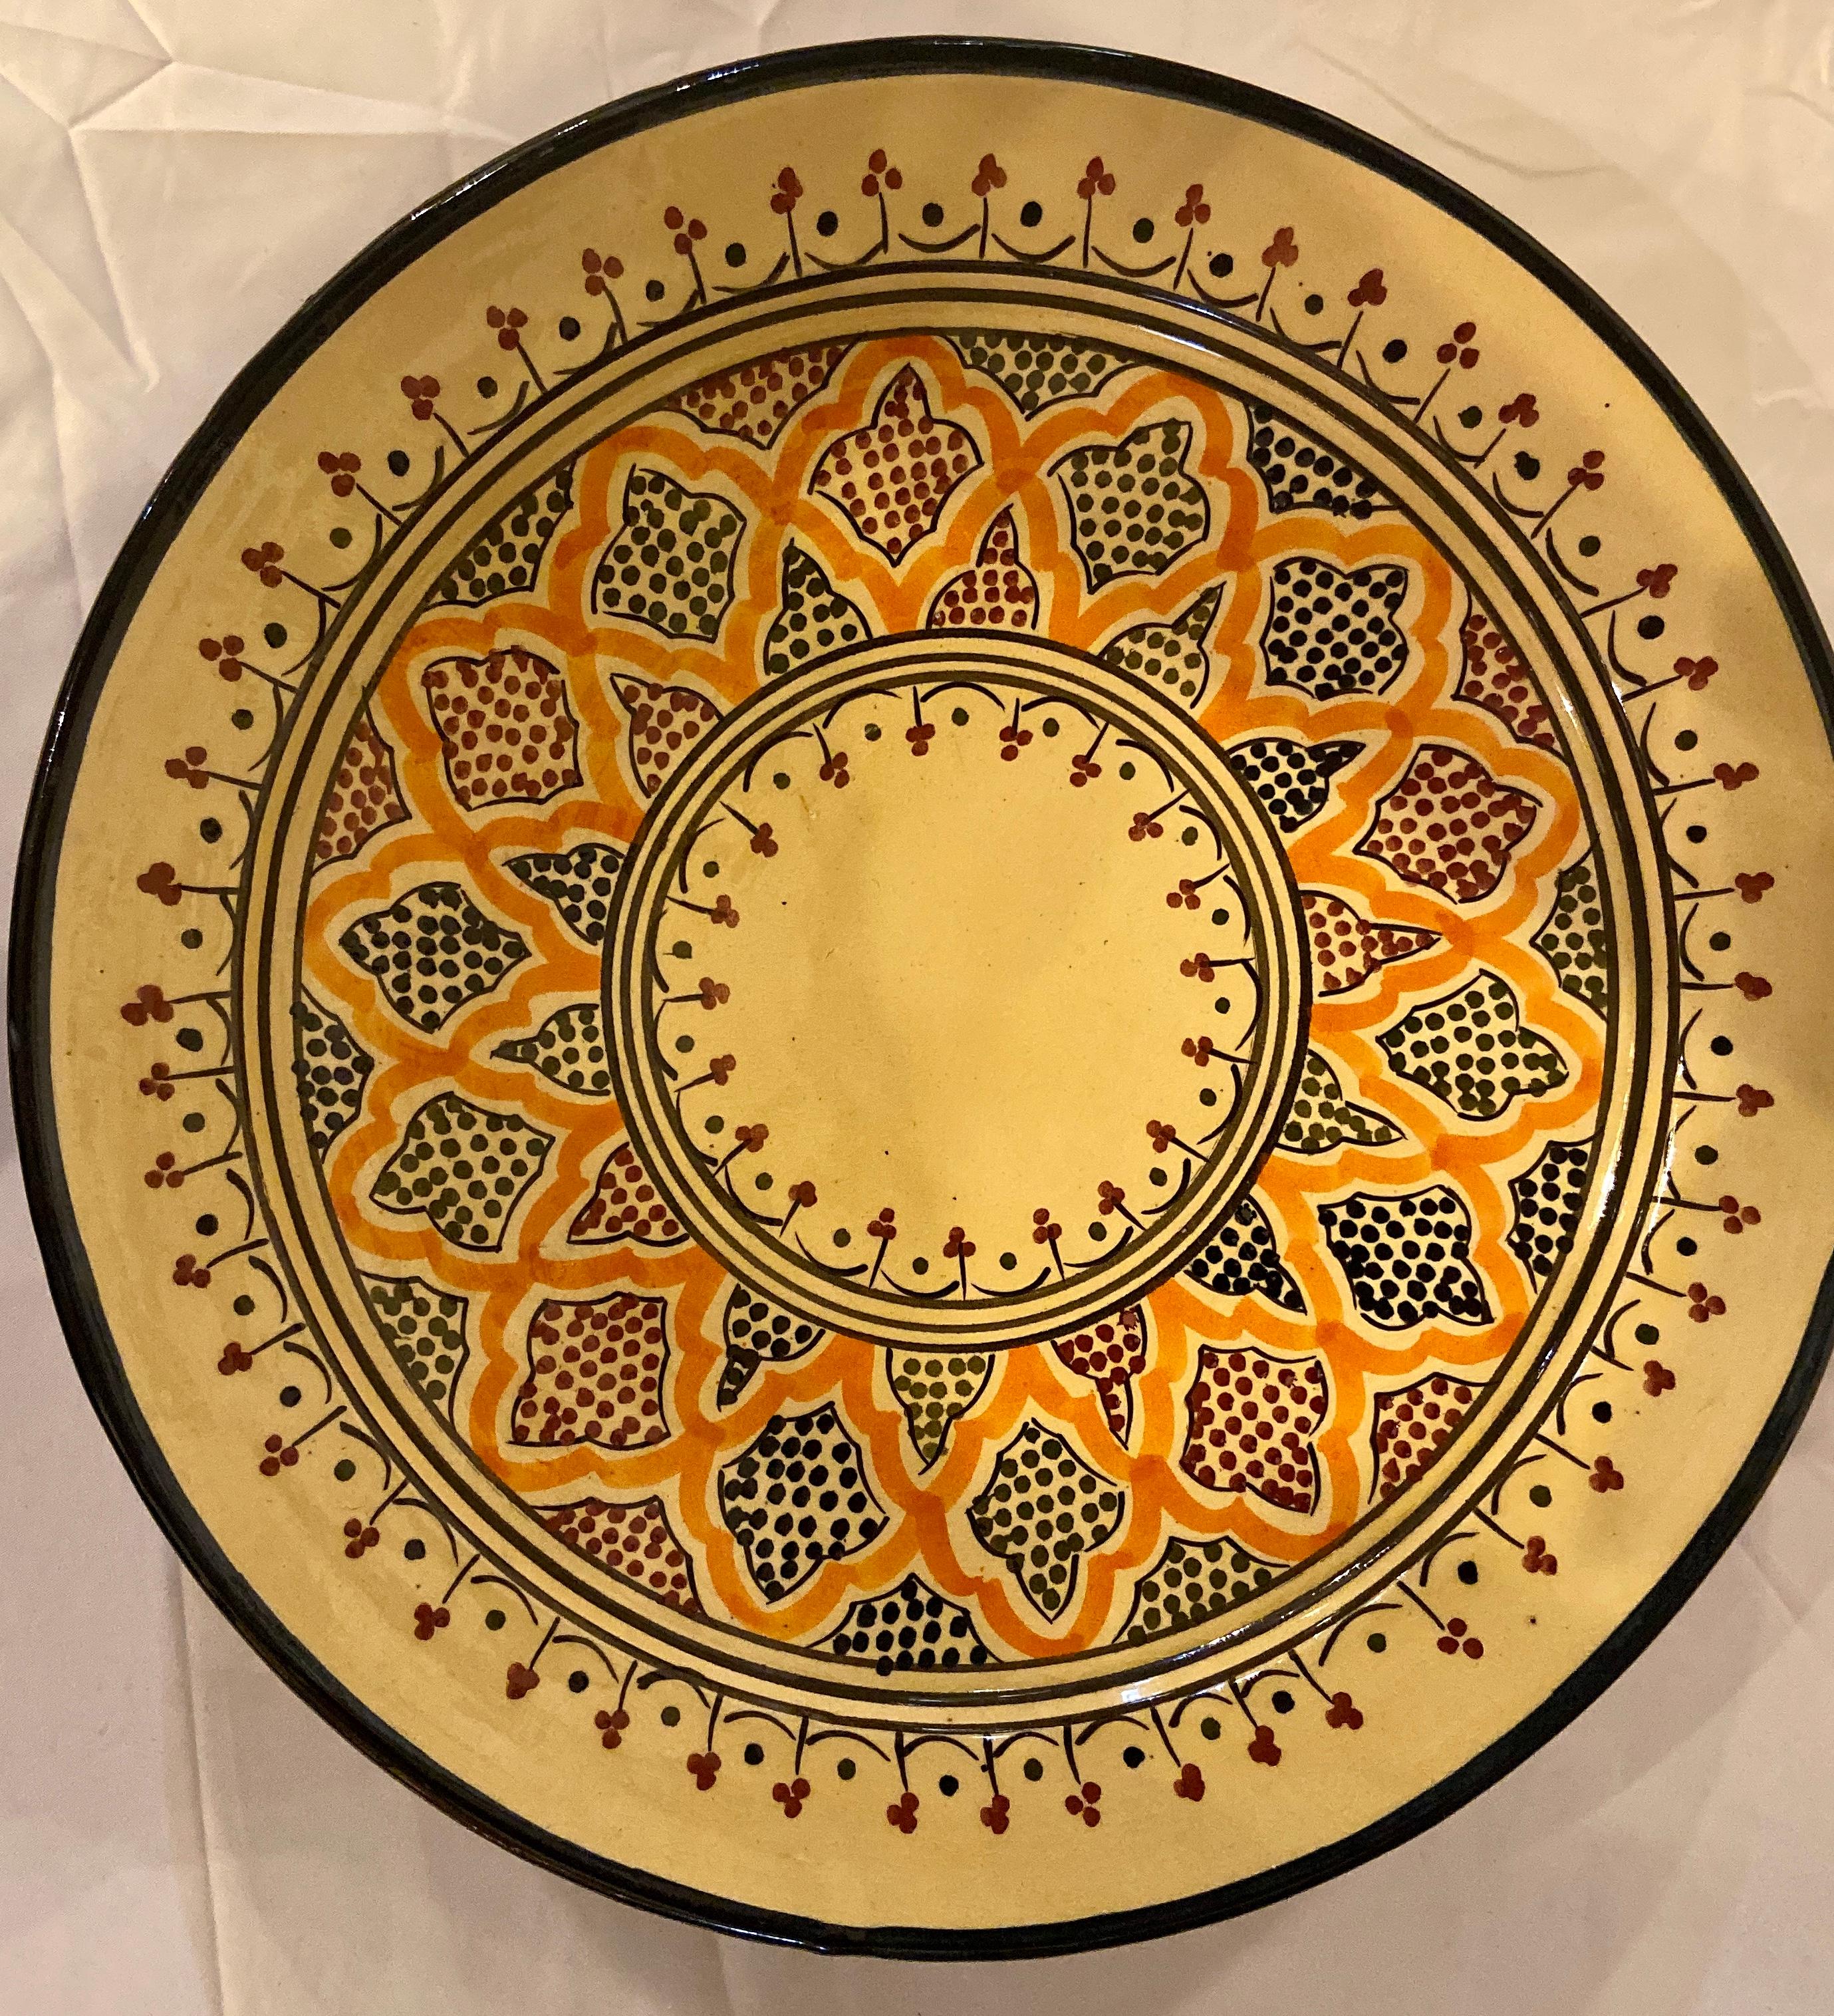 With a delightful floral and arabesque design hand painted in multiple colors in blue, yellow, green and orange. These gorgeous, large-size ceramic dinner plates possess a truly exotic look. Handcrafted in the bustling workshops of master artisans